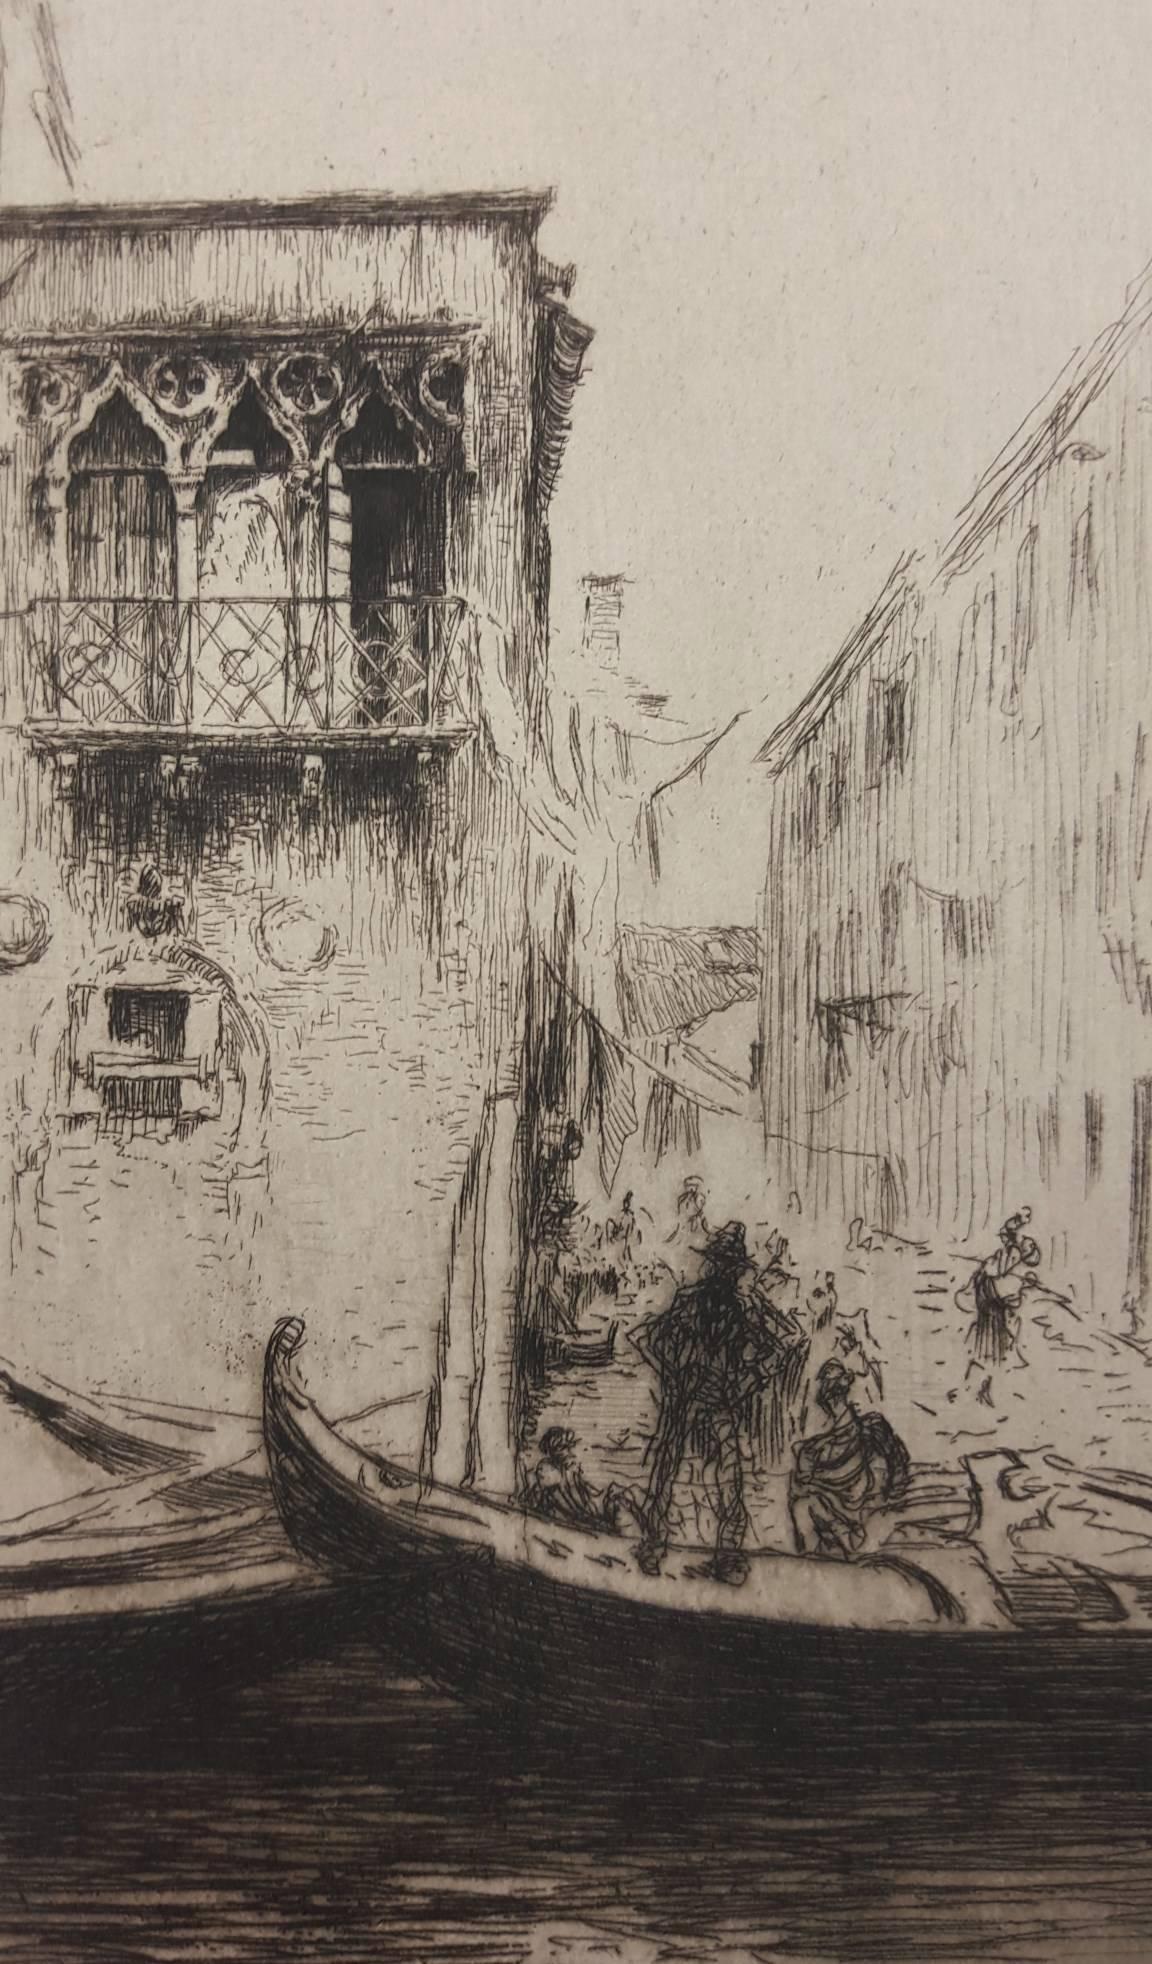 An original etching by French artist Edgar Chahine (1874-1947) titled "Rio ca Foscari, Venice", 1906. Signed in the plate lower left. Sheet size: 10.75" x 7". Image size: 8.75" x 5.75". Mint condition.

This etching